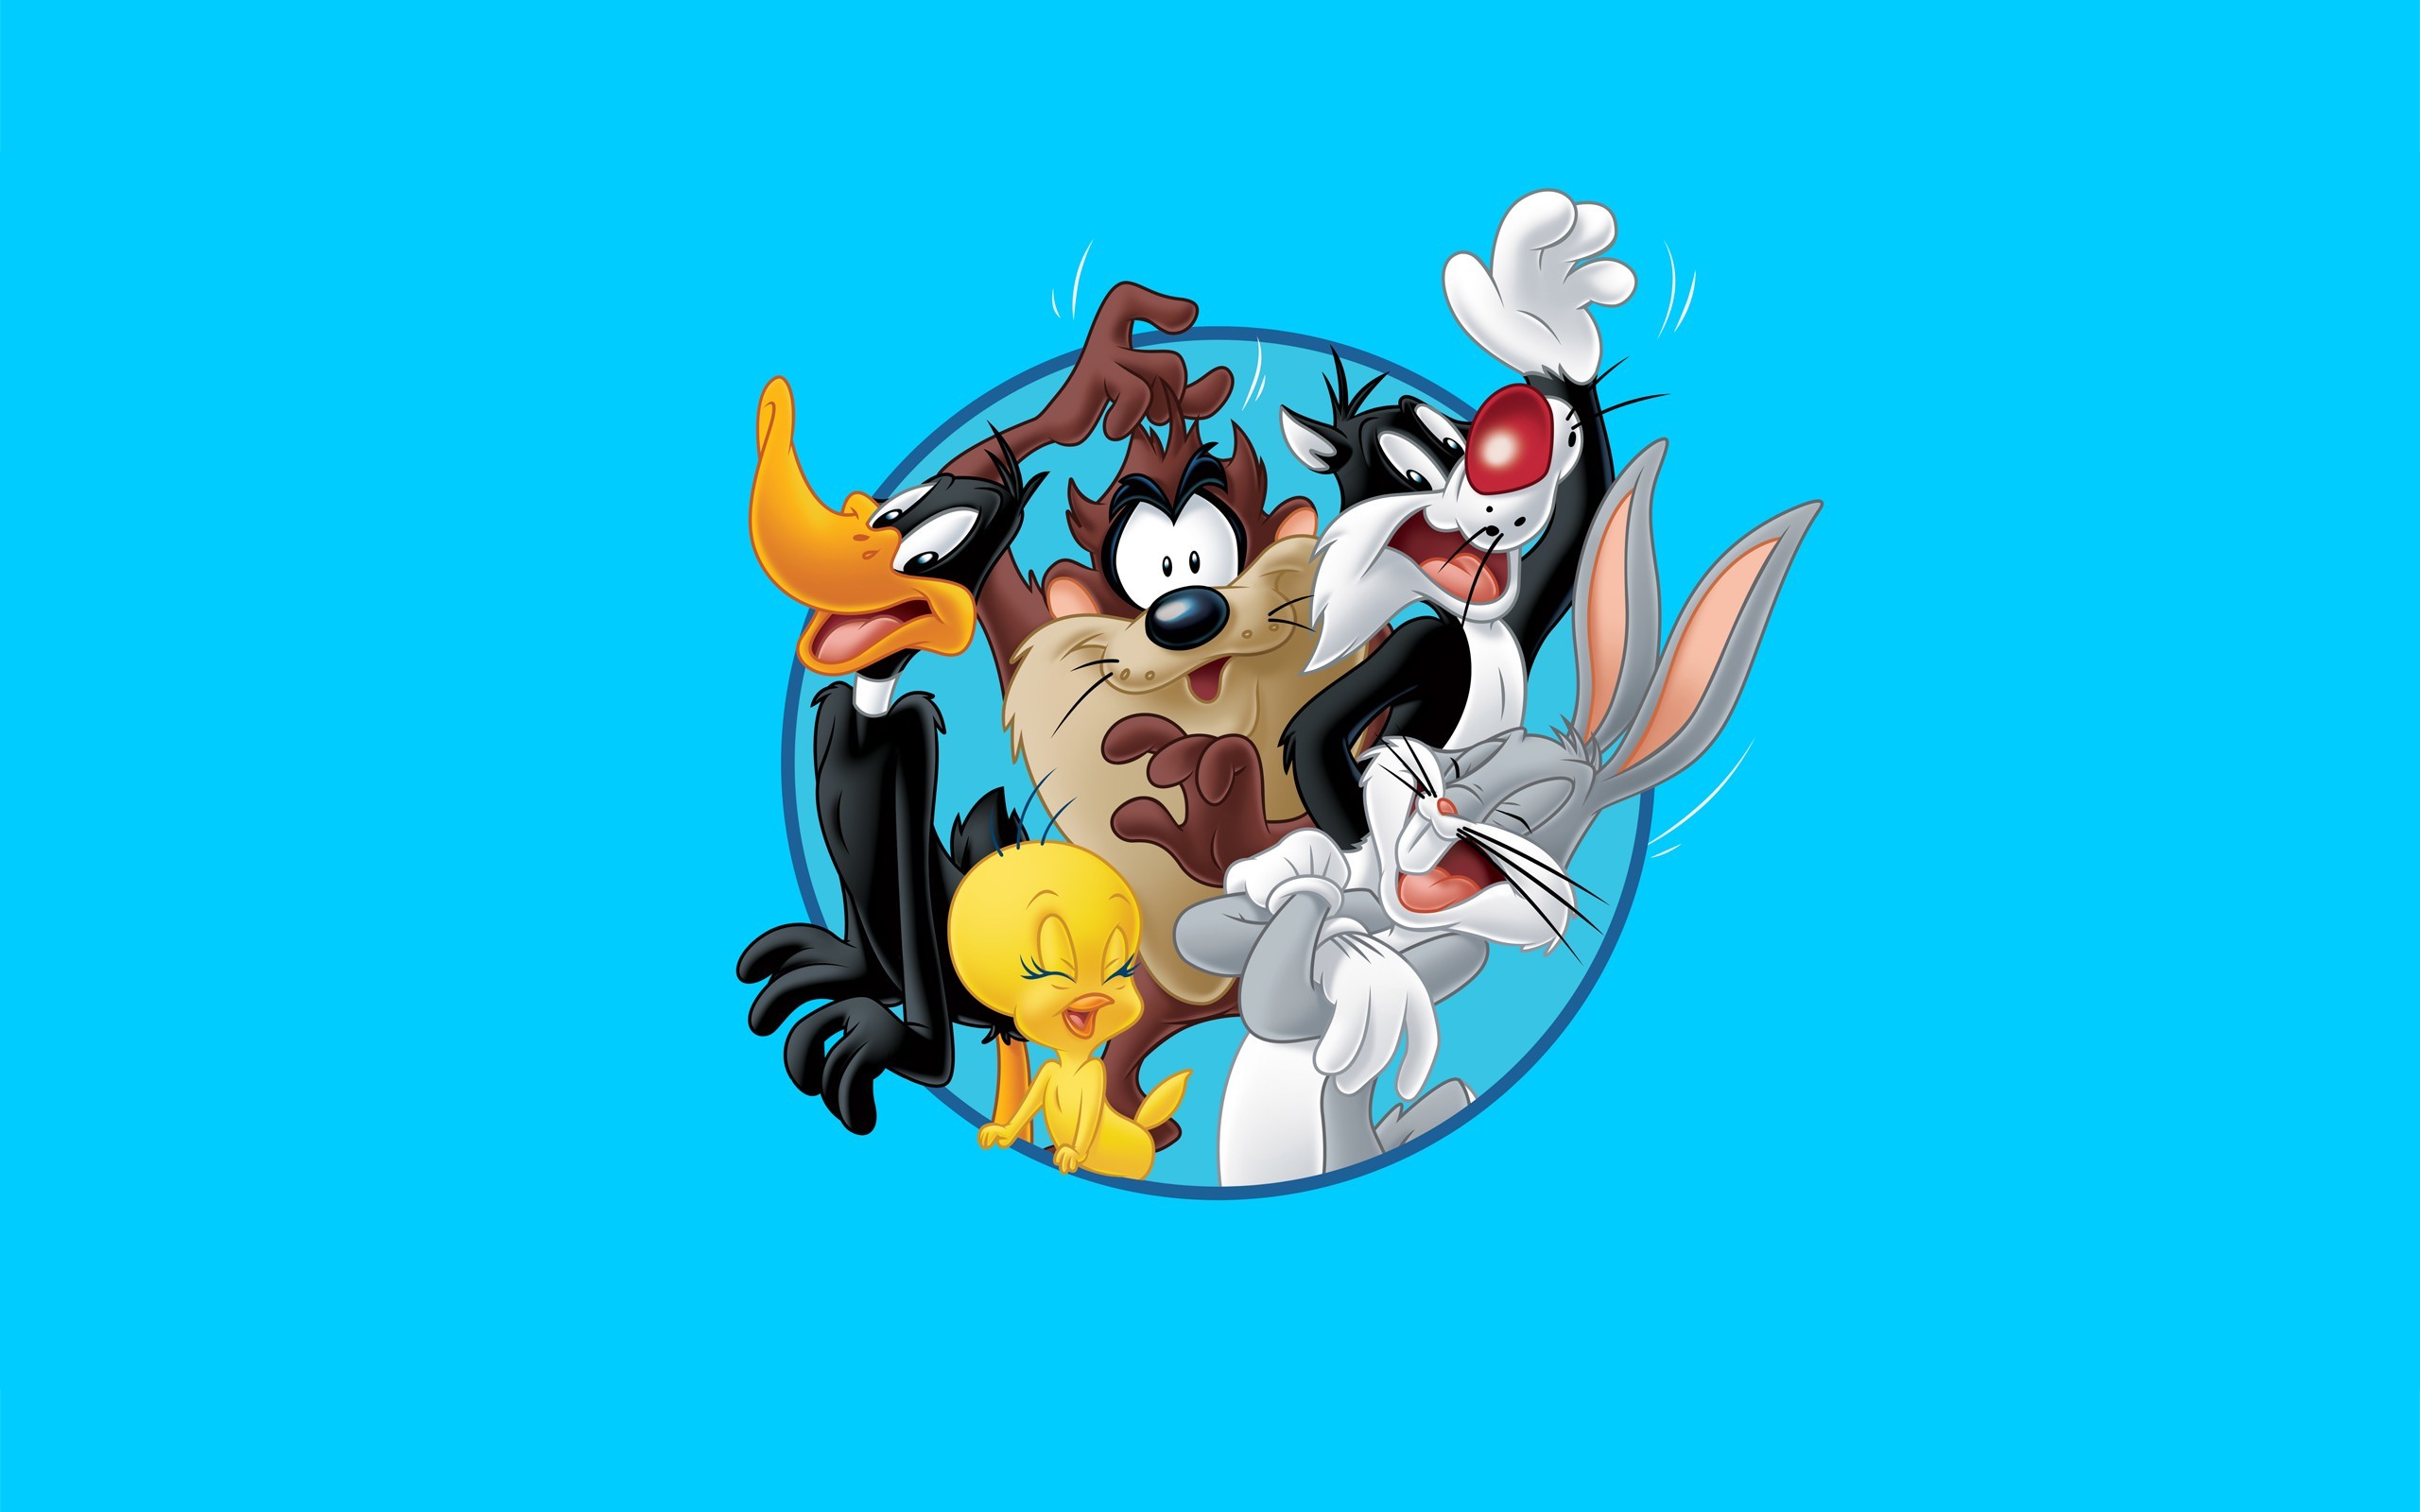 Ewallpaper Hub brings Looney Tunes wallpaper in high resolution for you. We collect premium quality Looney Tunes wallpapers HD from all over the internet